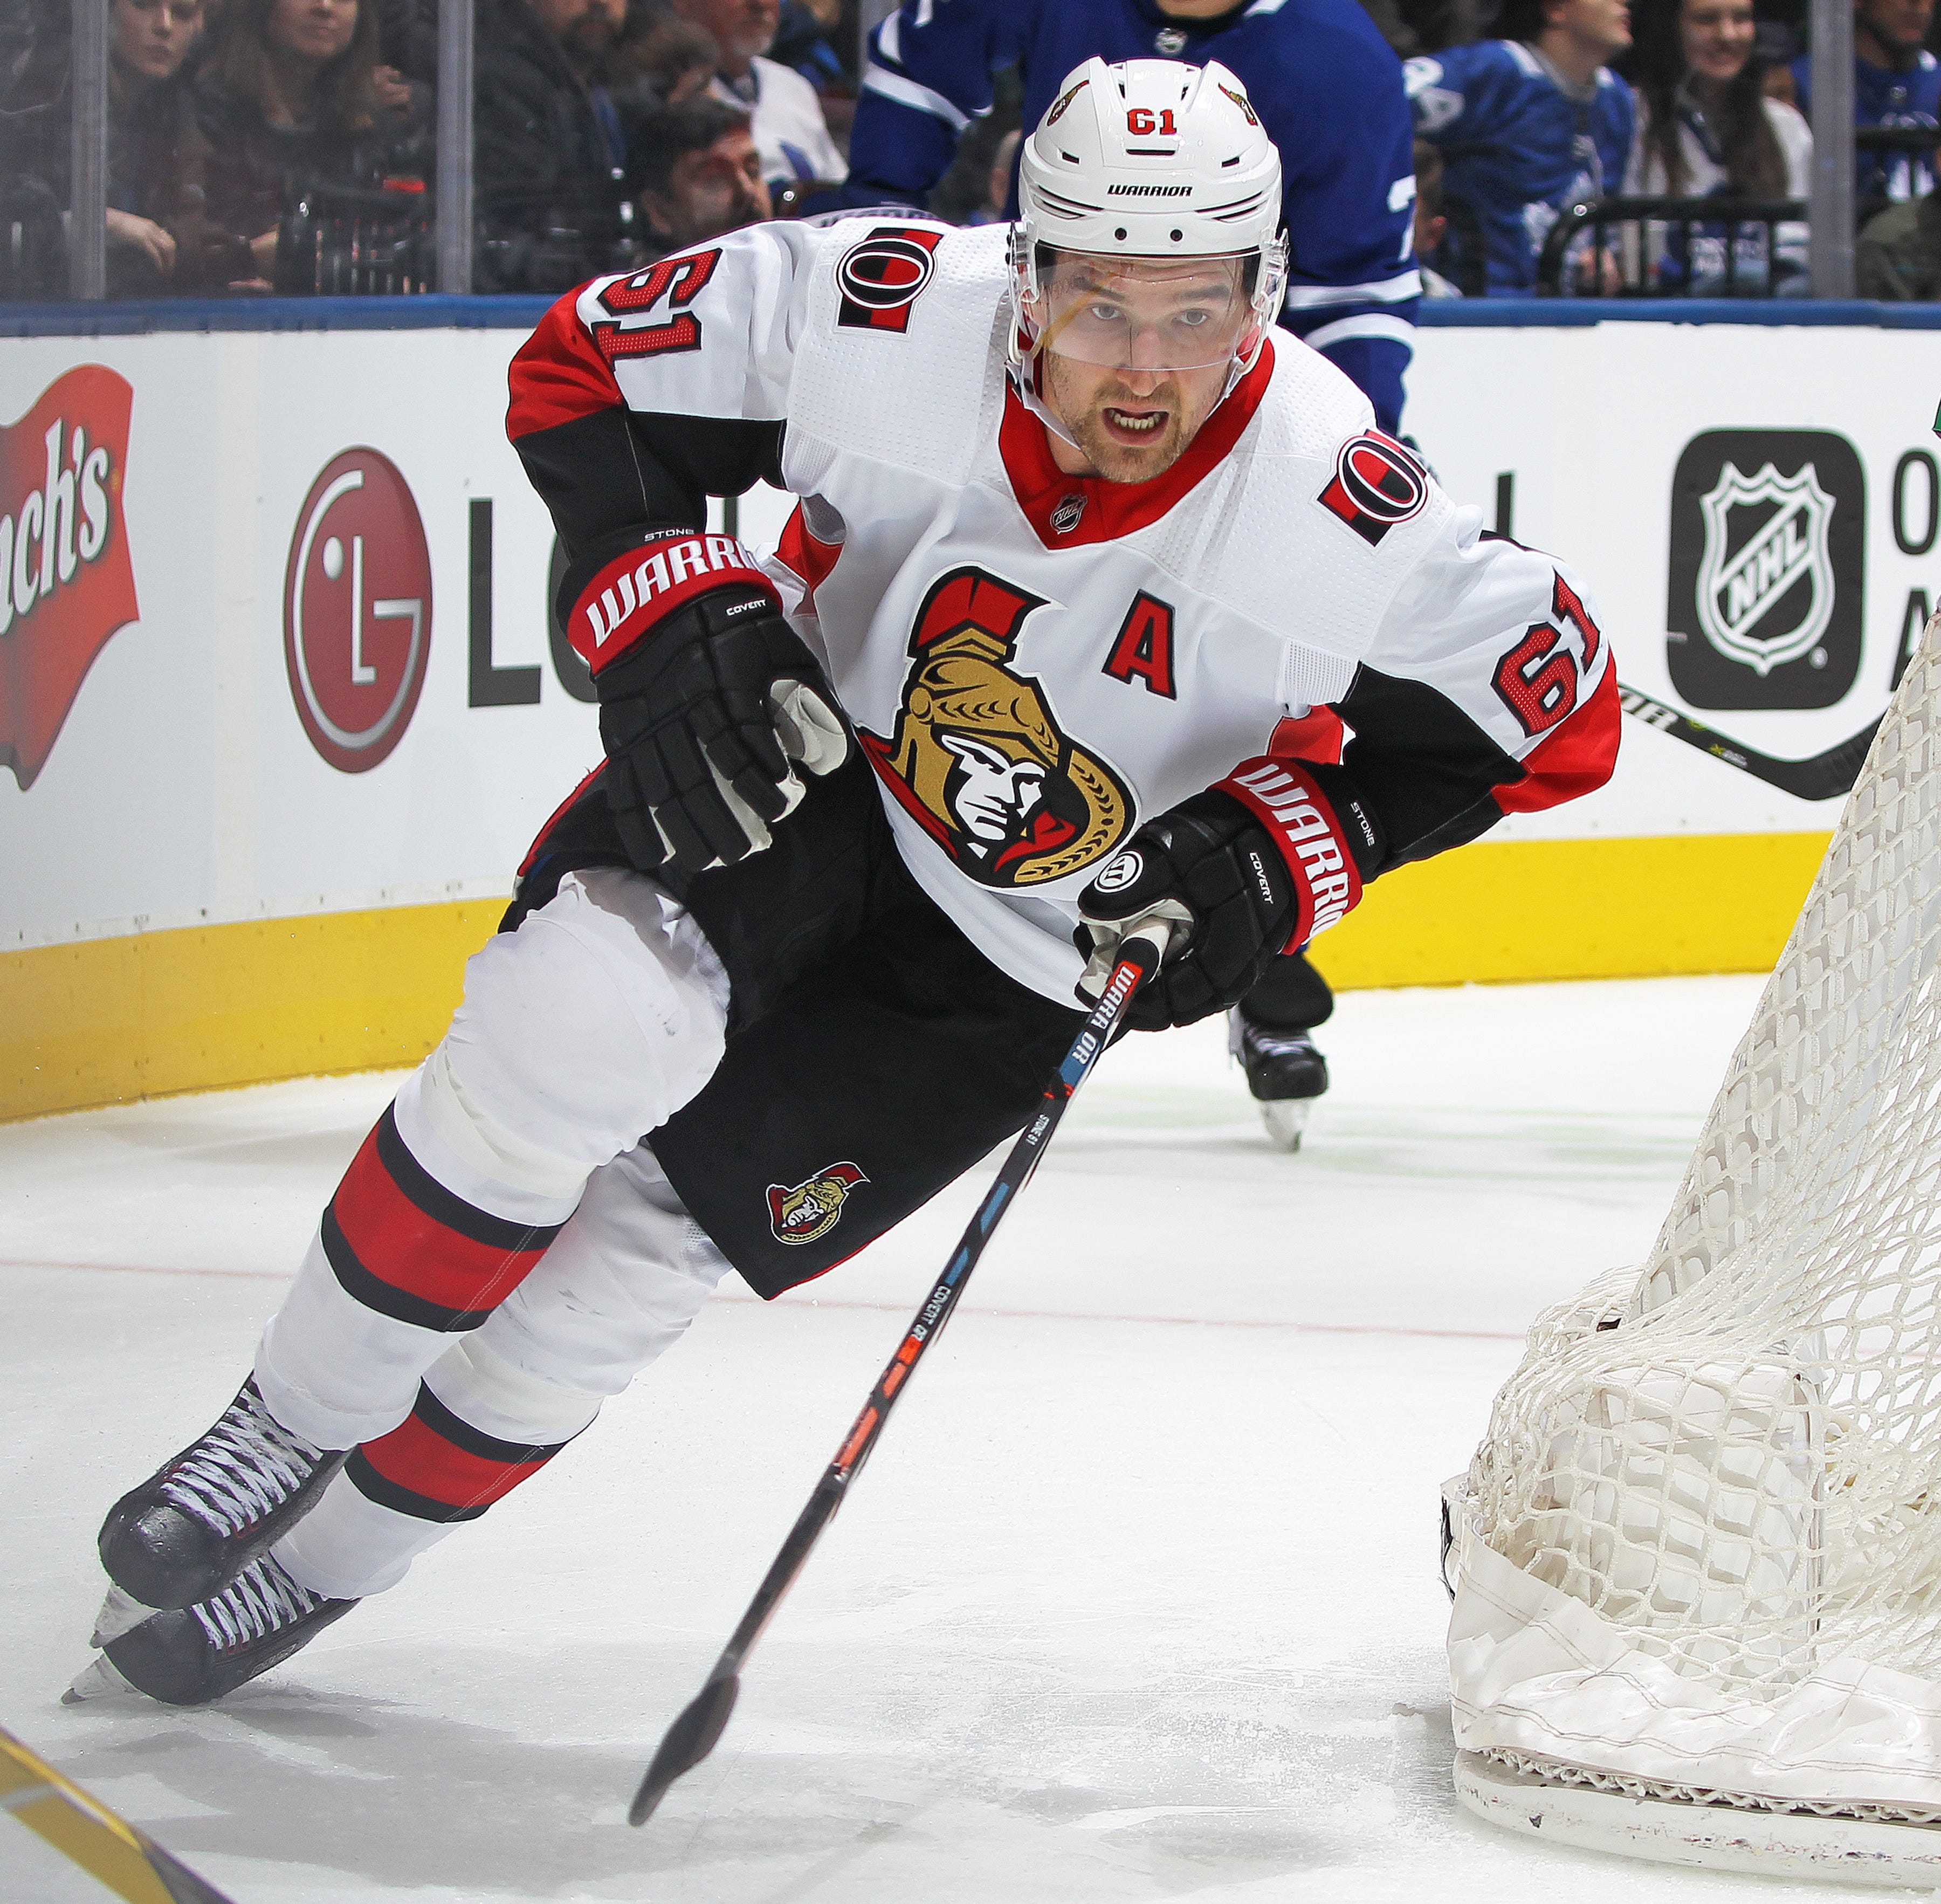 2. Mark Stone, RW, Ottawa: Many fans probably don’t realize how good of an all-around player Stone is. The Senators are making a push to re-sign Stone, but the chances are slim, further weakening their rebuild.